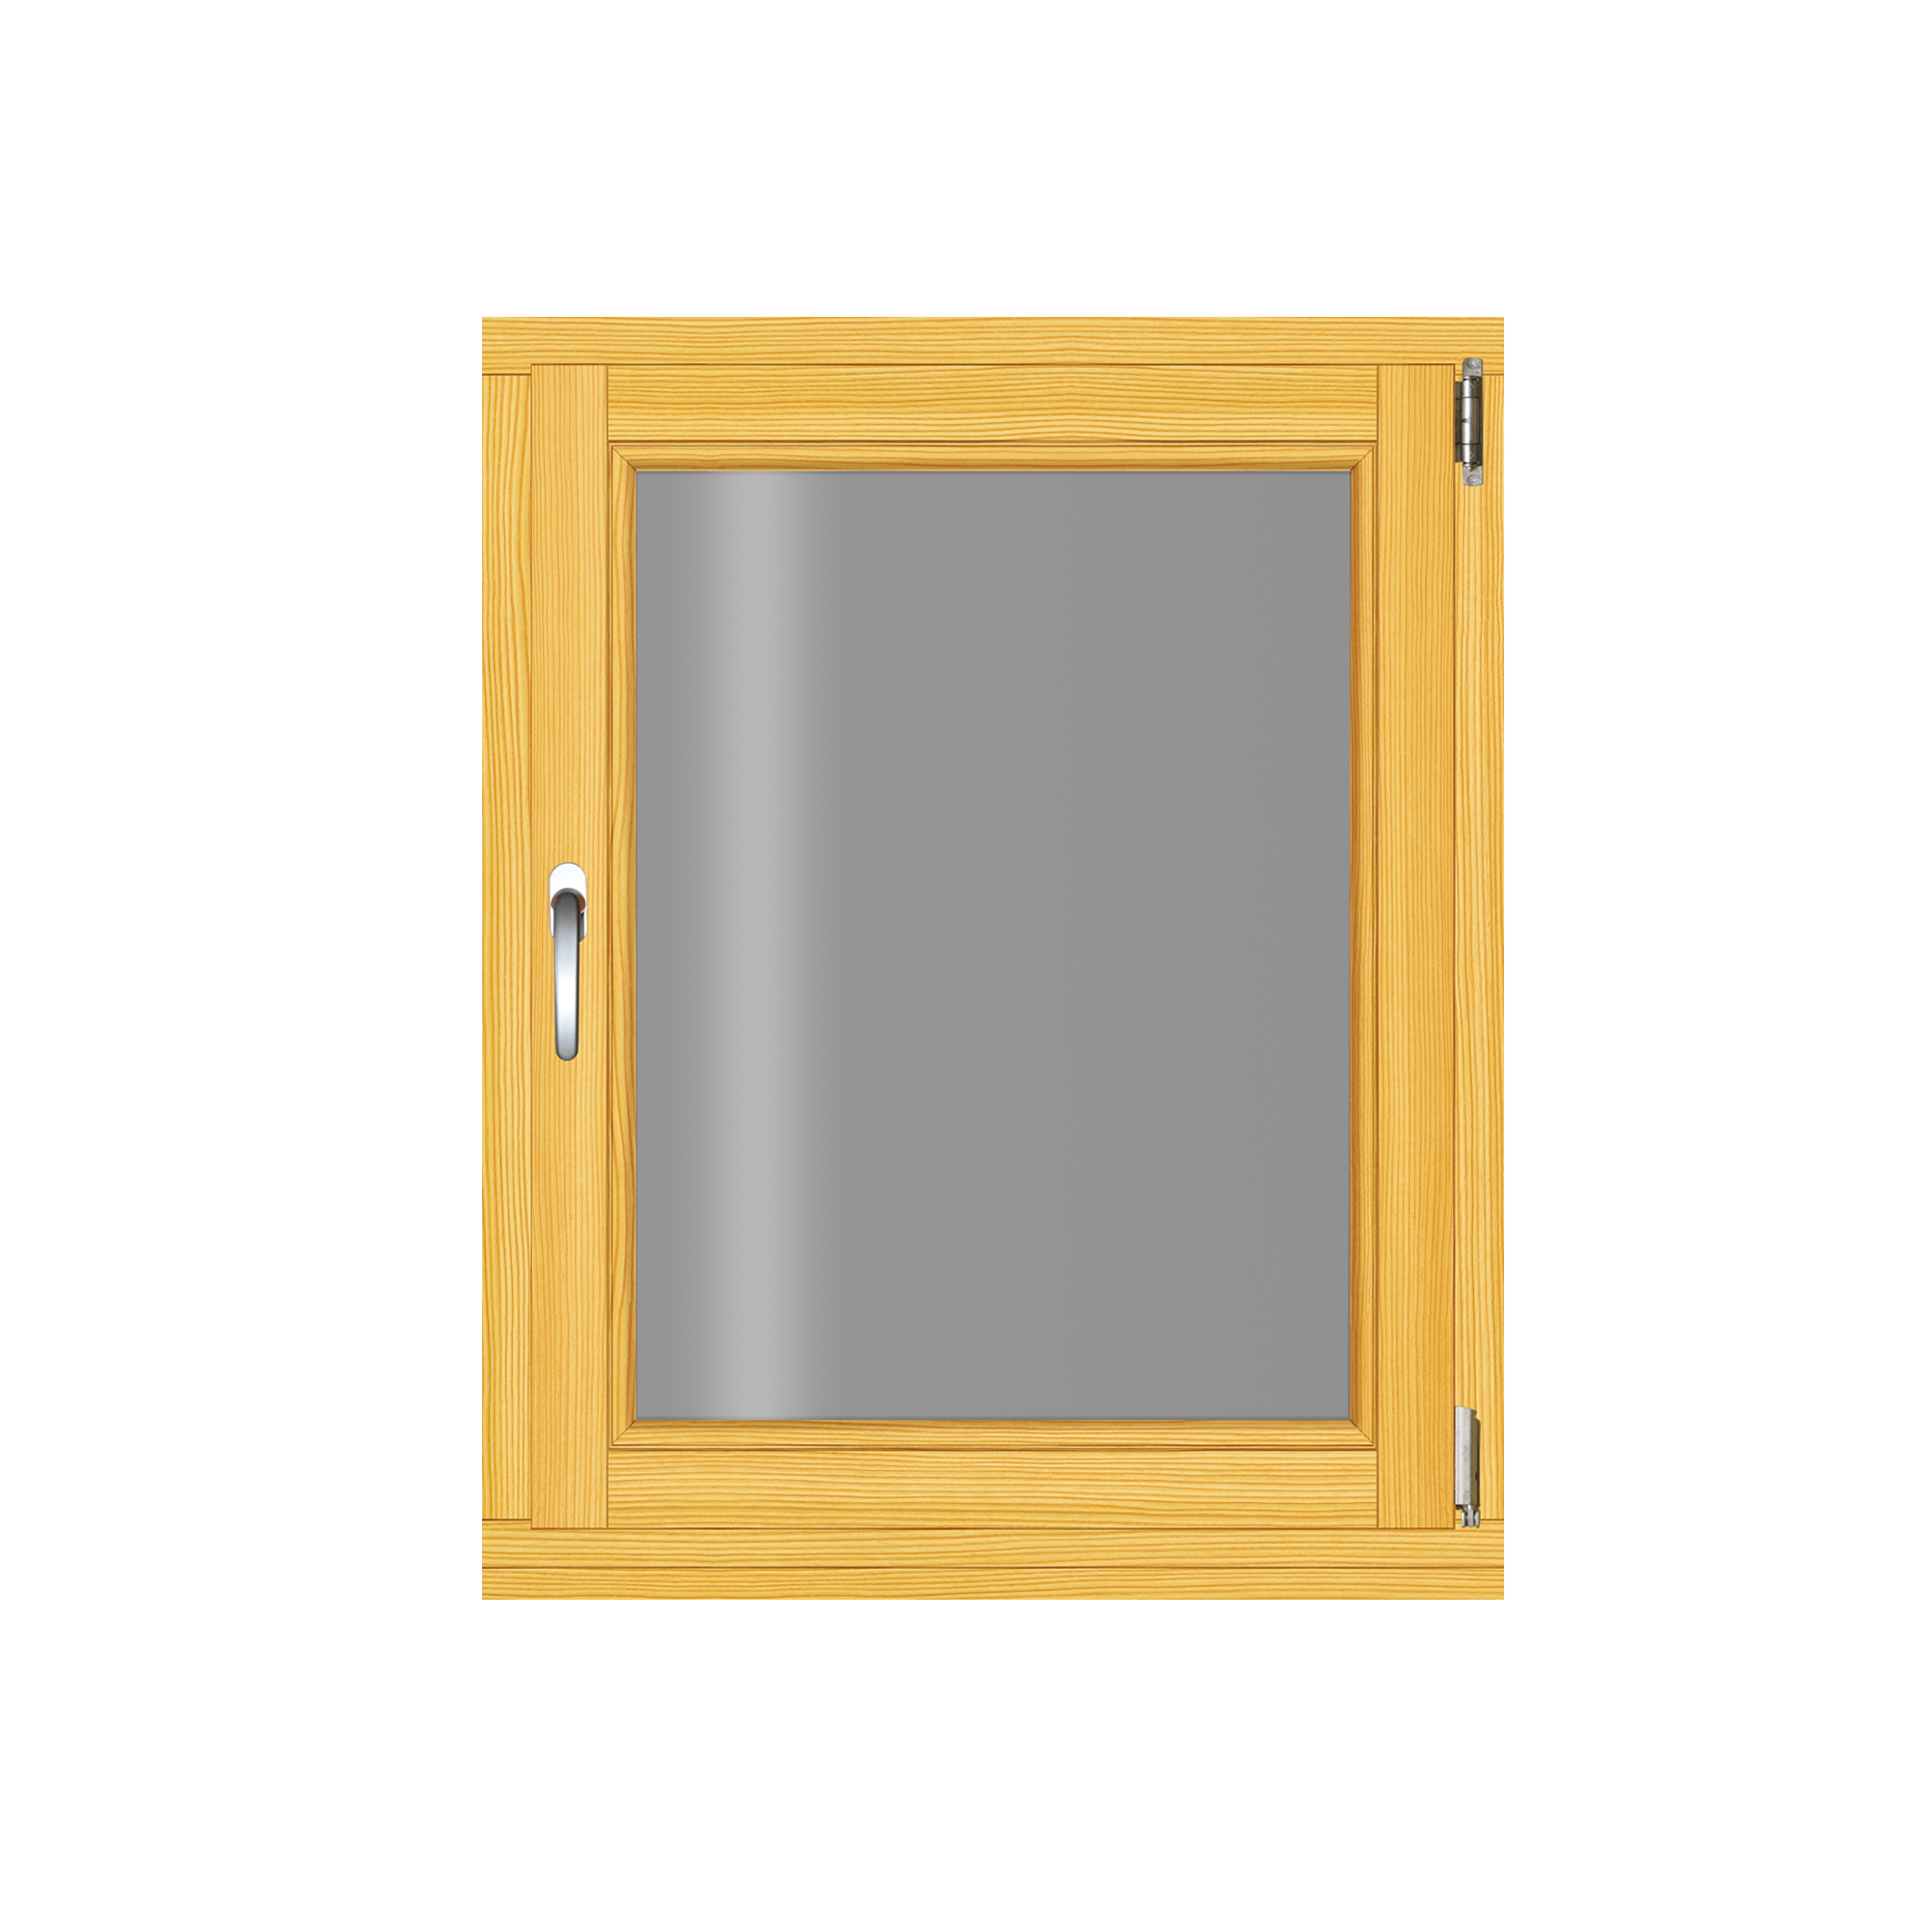 Holzfenster 980 x 1080 mm Fichte DIN rechts + product picture